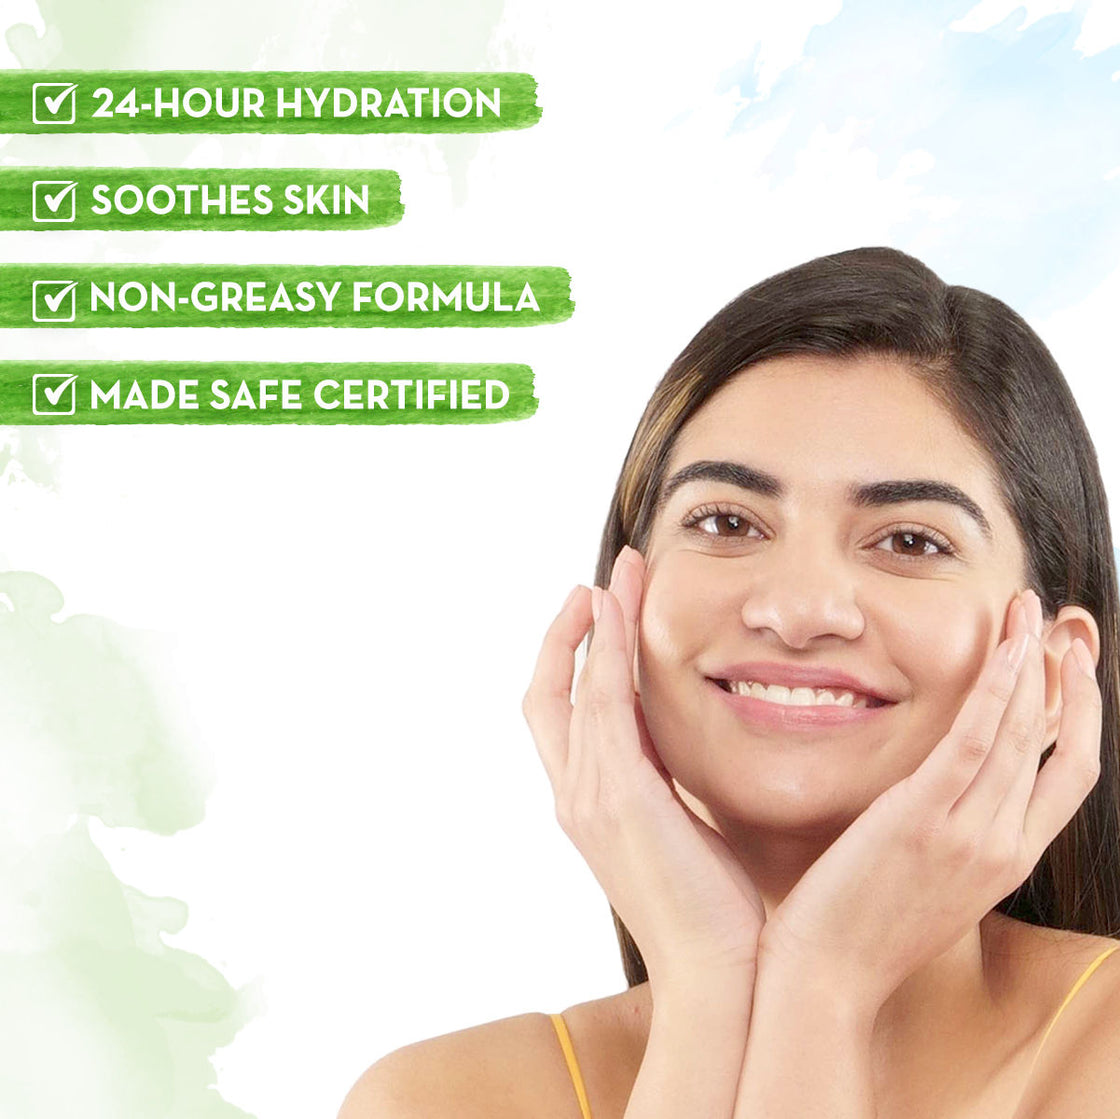 Mamaearth Aloe Vera Oil-Free Face Moisturizer For Oily Skin For A Youthful Glow-3